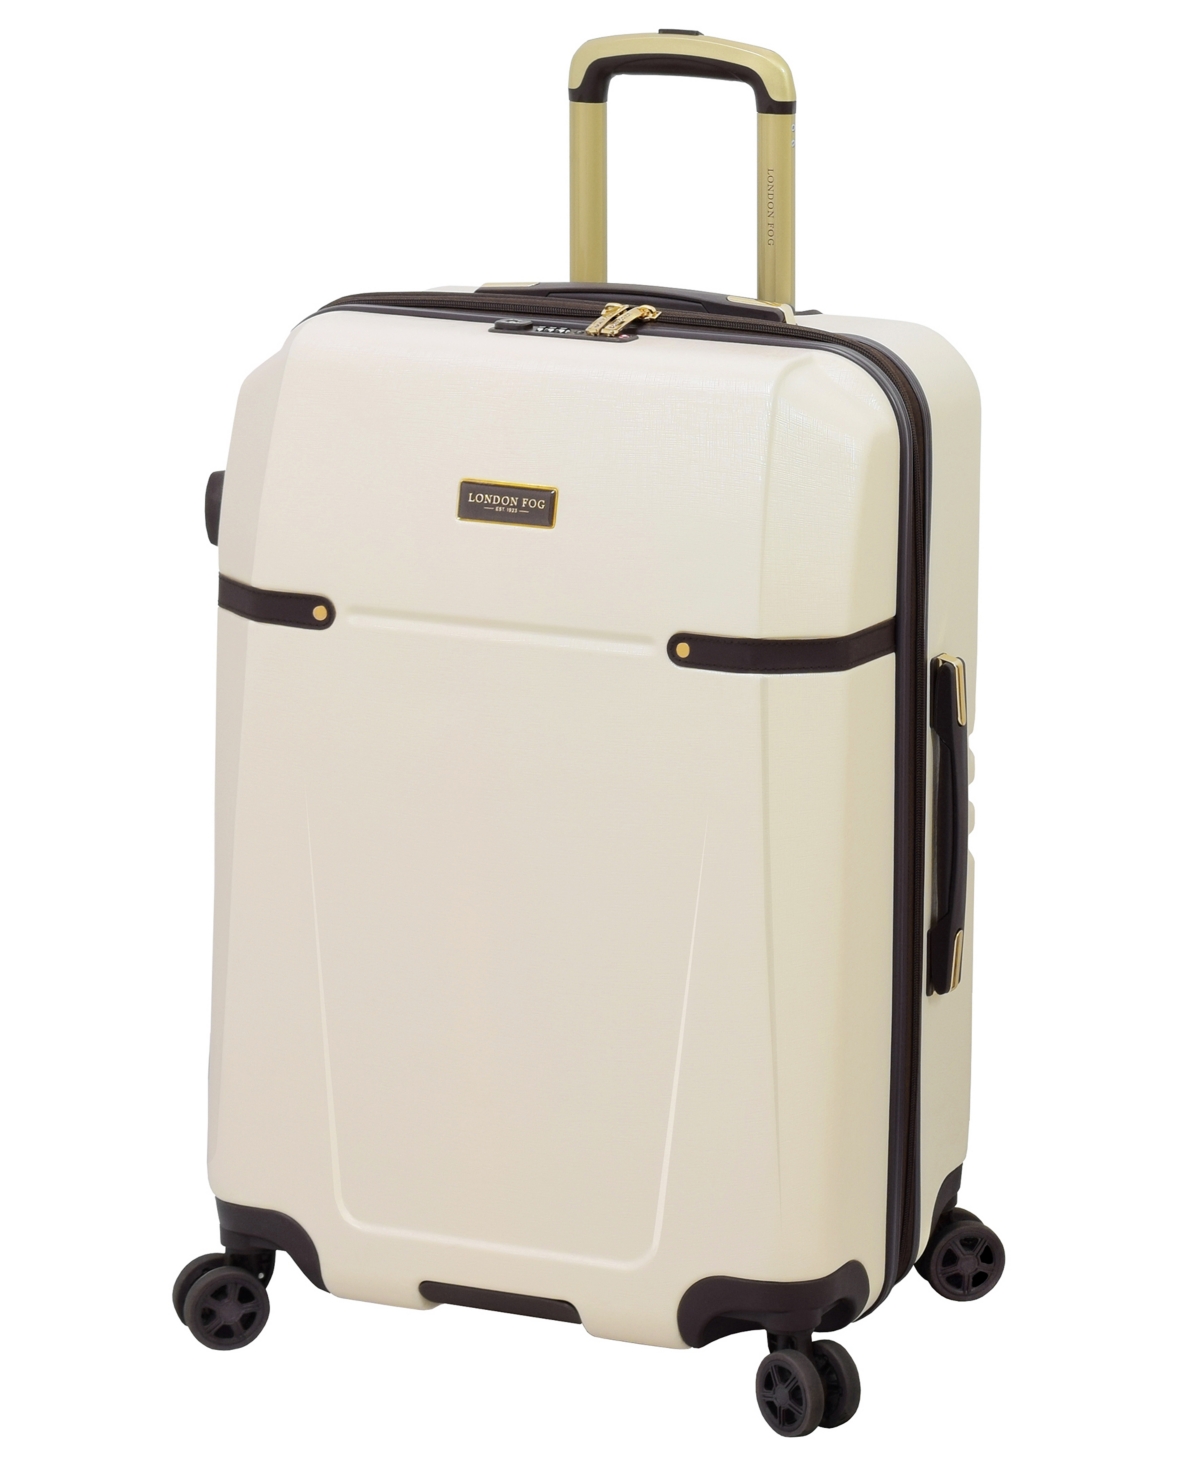 Closeout! London Fog Brentwood Ii 25" Expandable Hardside Spinner Luggage - Cream